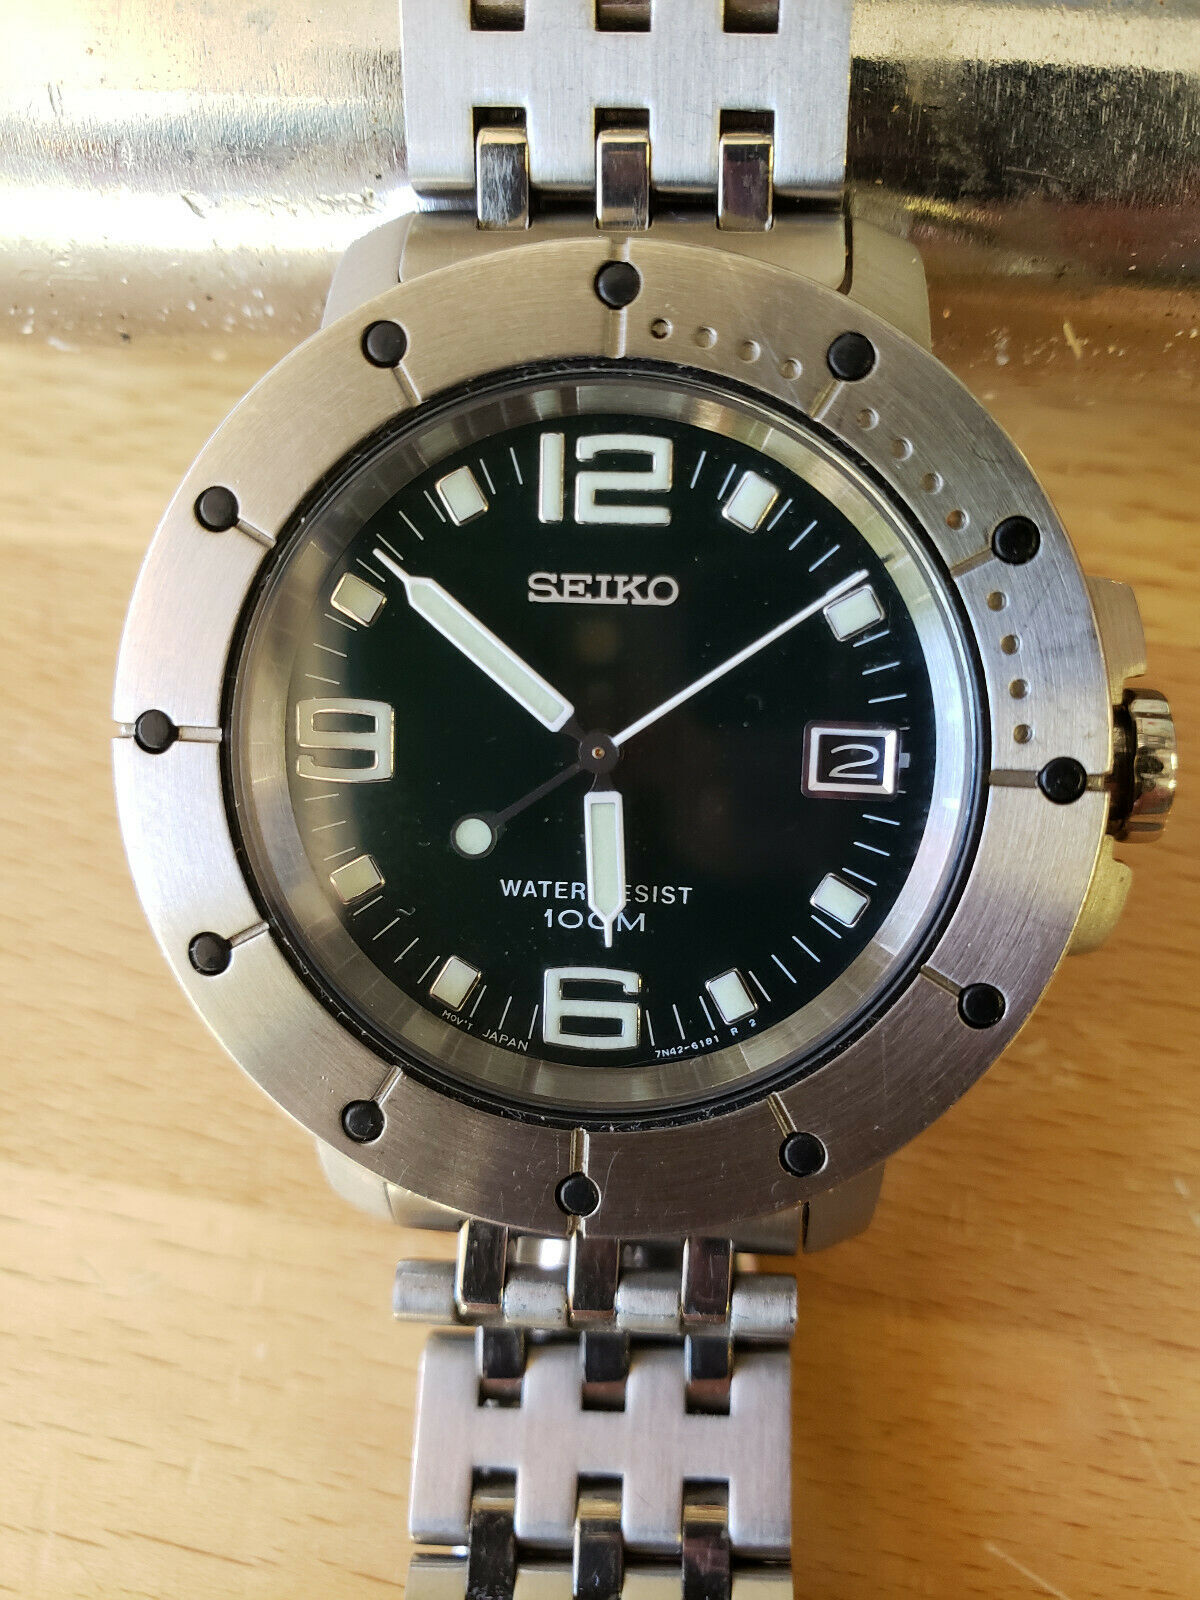 Seiko Diver 7n42-6130, green face, 39mm, serial #850251. | WatchCharts